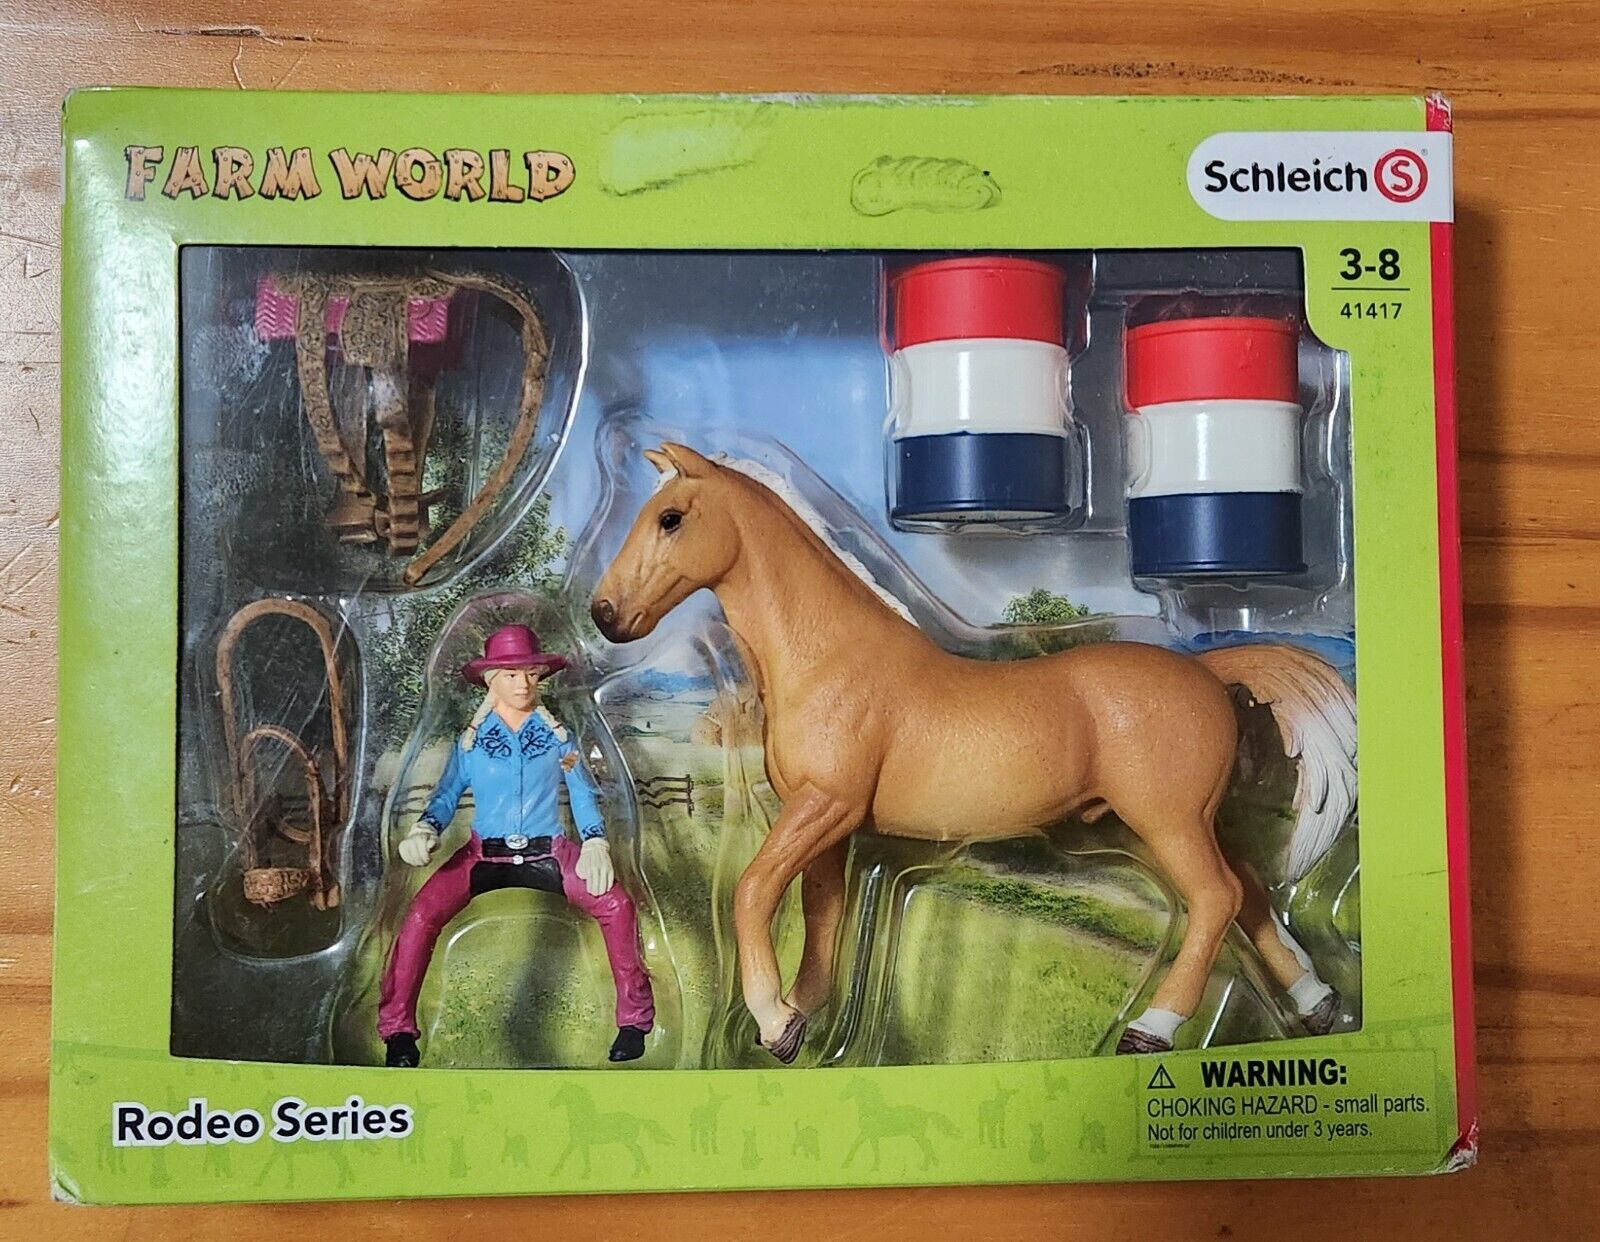 Schleich Rodeo Series Farm World NEW in package sealed #41417 READ- marks on box